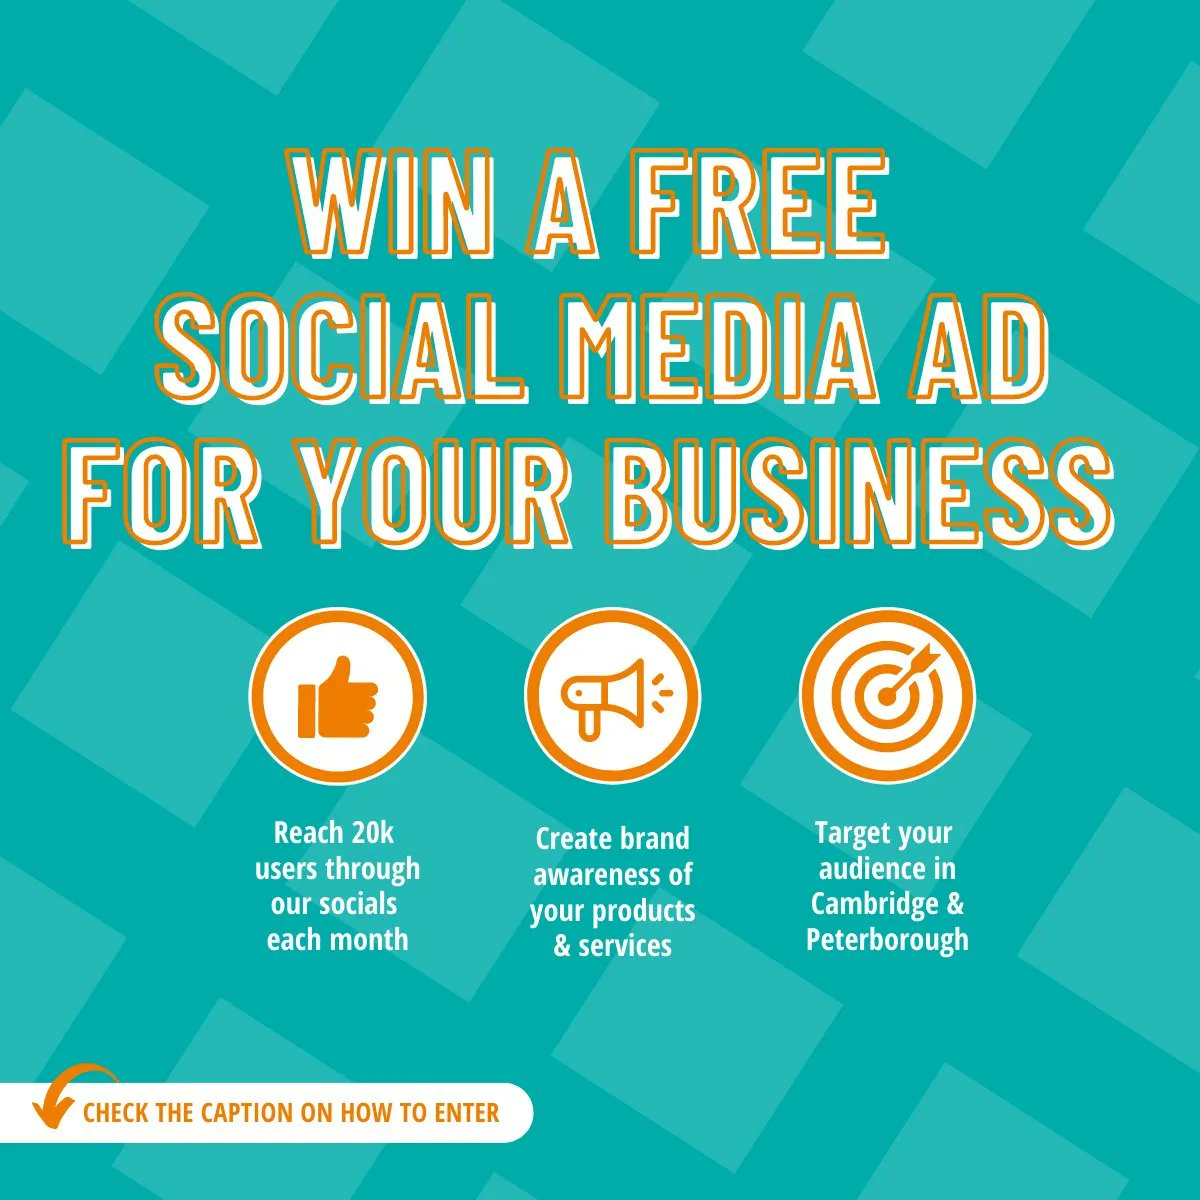 🎉 WIN a FREE social media advert personalised for your business across our social channels! 🎉

To enter:
👉 Tag your business in the comments
👉 Follow us
👉 Retweet this post

Entries close Friday 26th May, at 12:00pm.

Good luck! ❤️

#businesscompetition